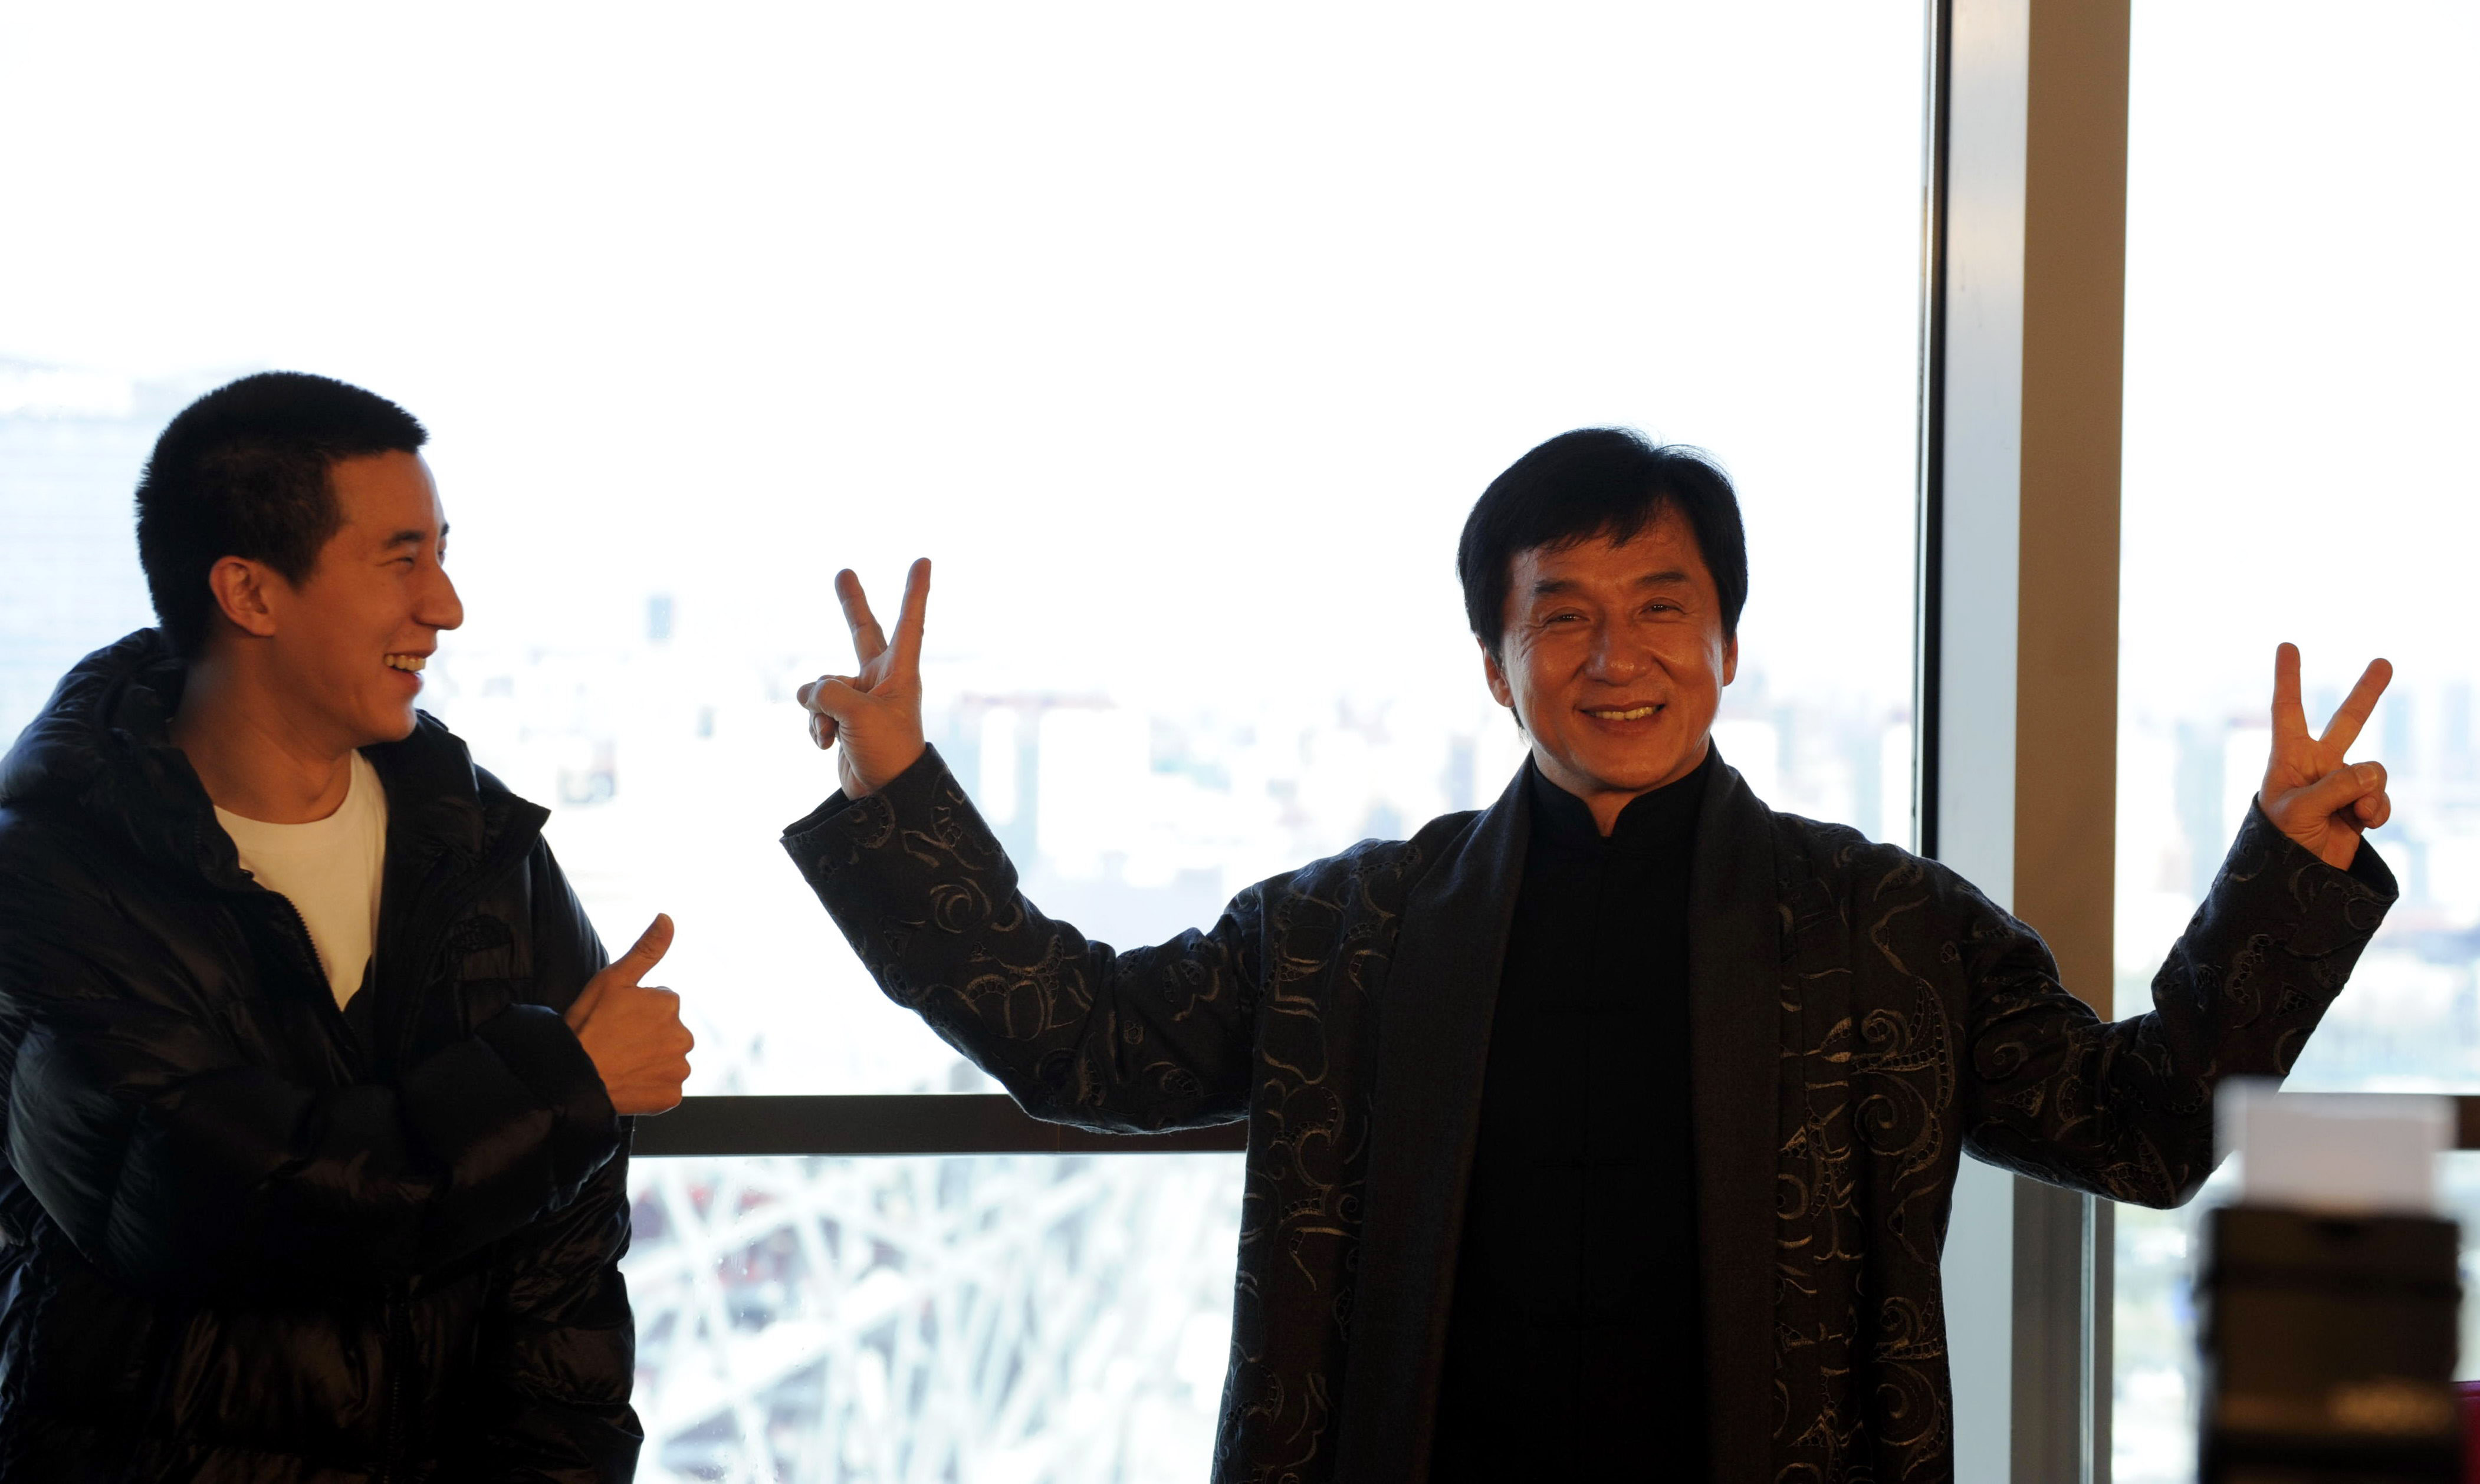 Jackie Chan and his son Jaycee Chan attend a press conference announcing a concert at the Bird's Nest Stadium on April 1, 2009 in Beijing, China. | Source: Getty Images